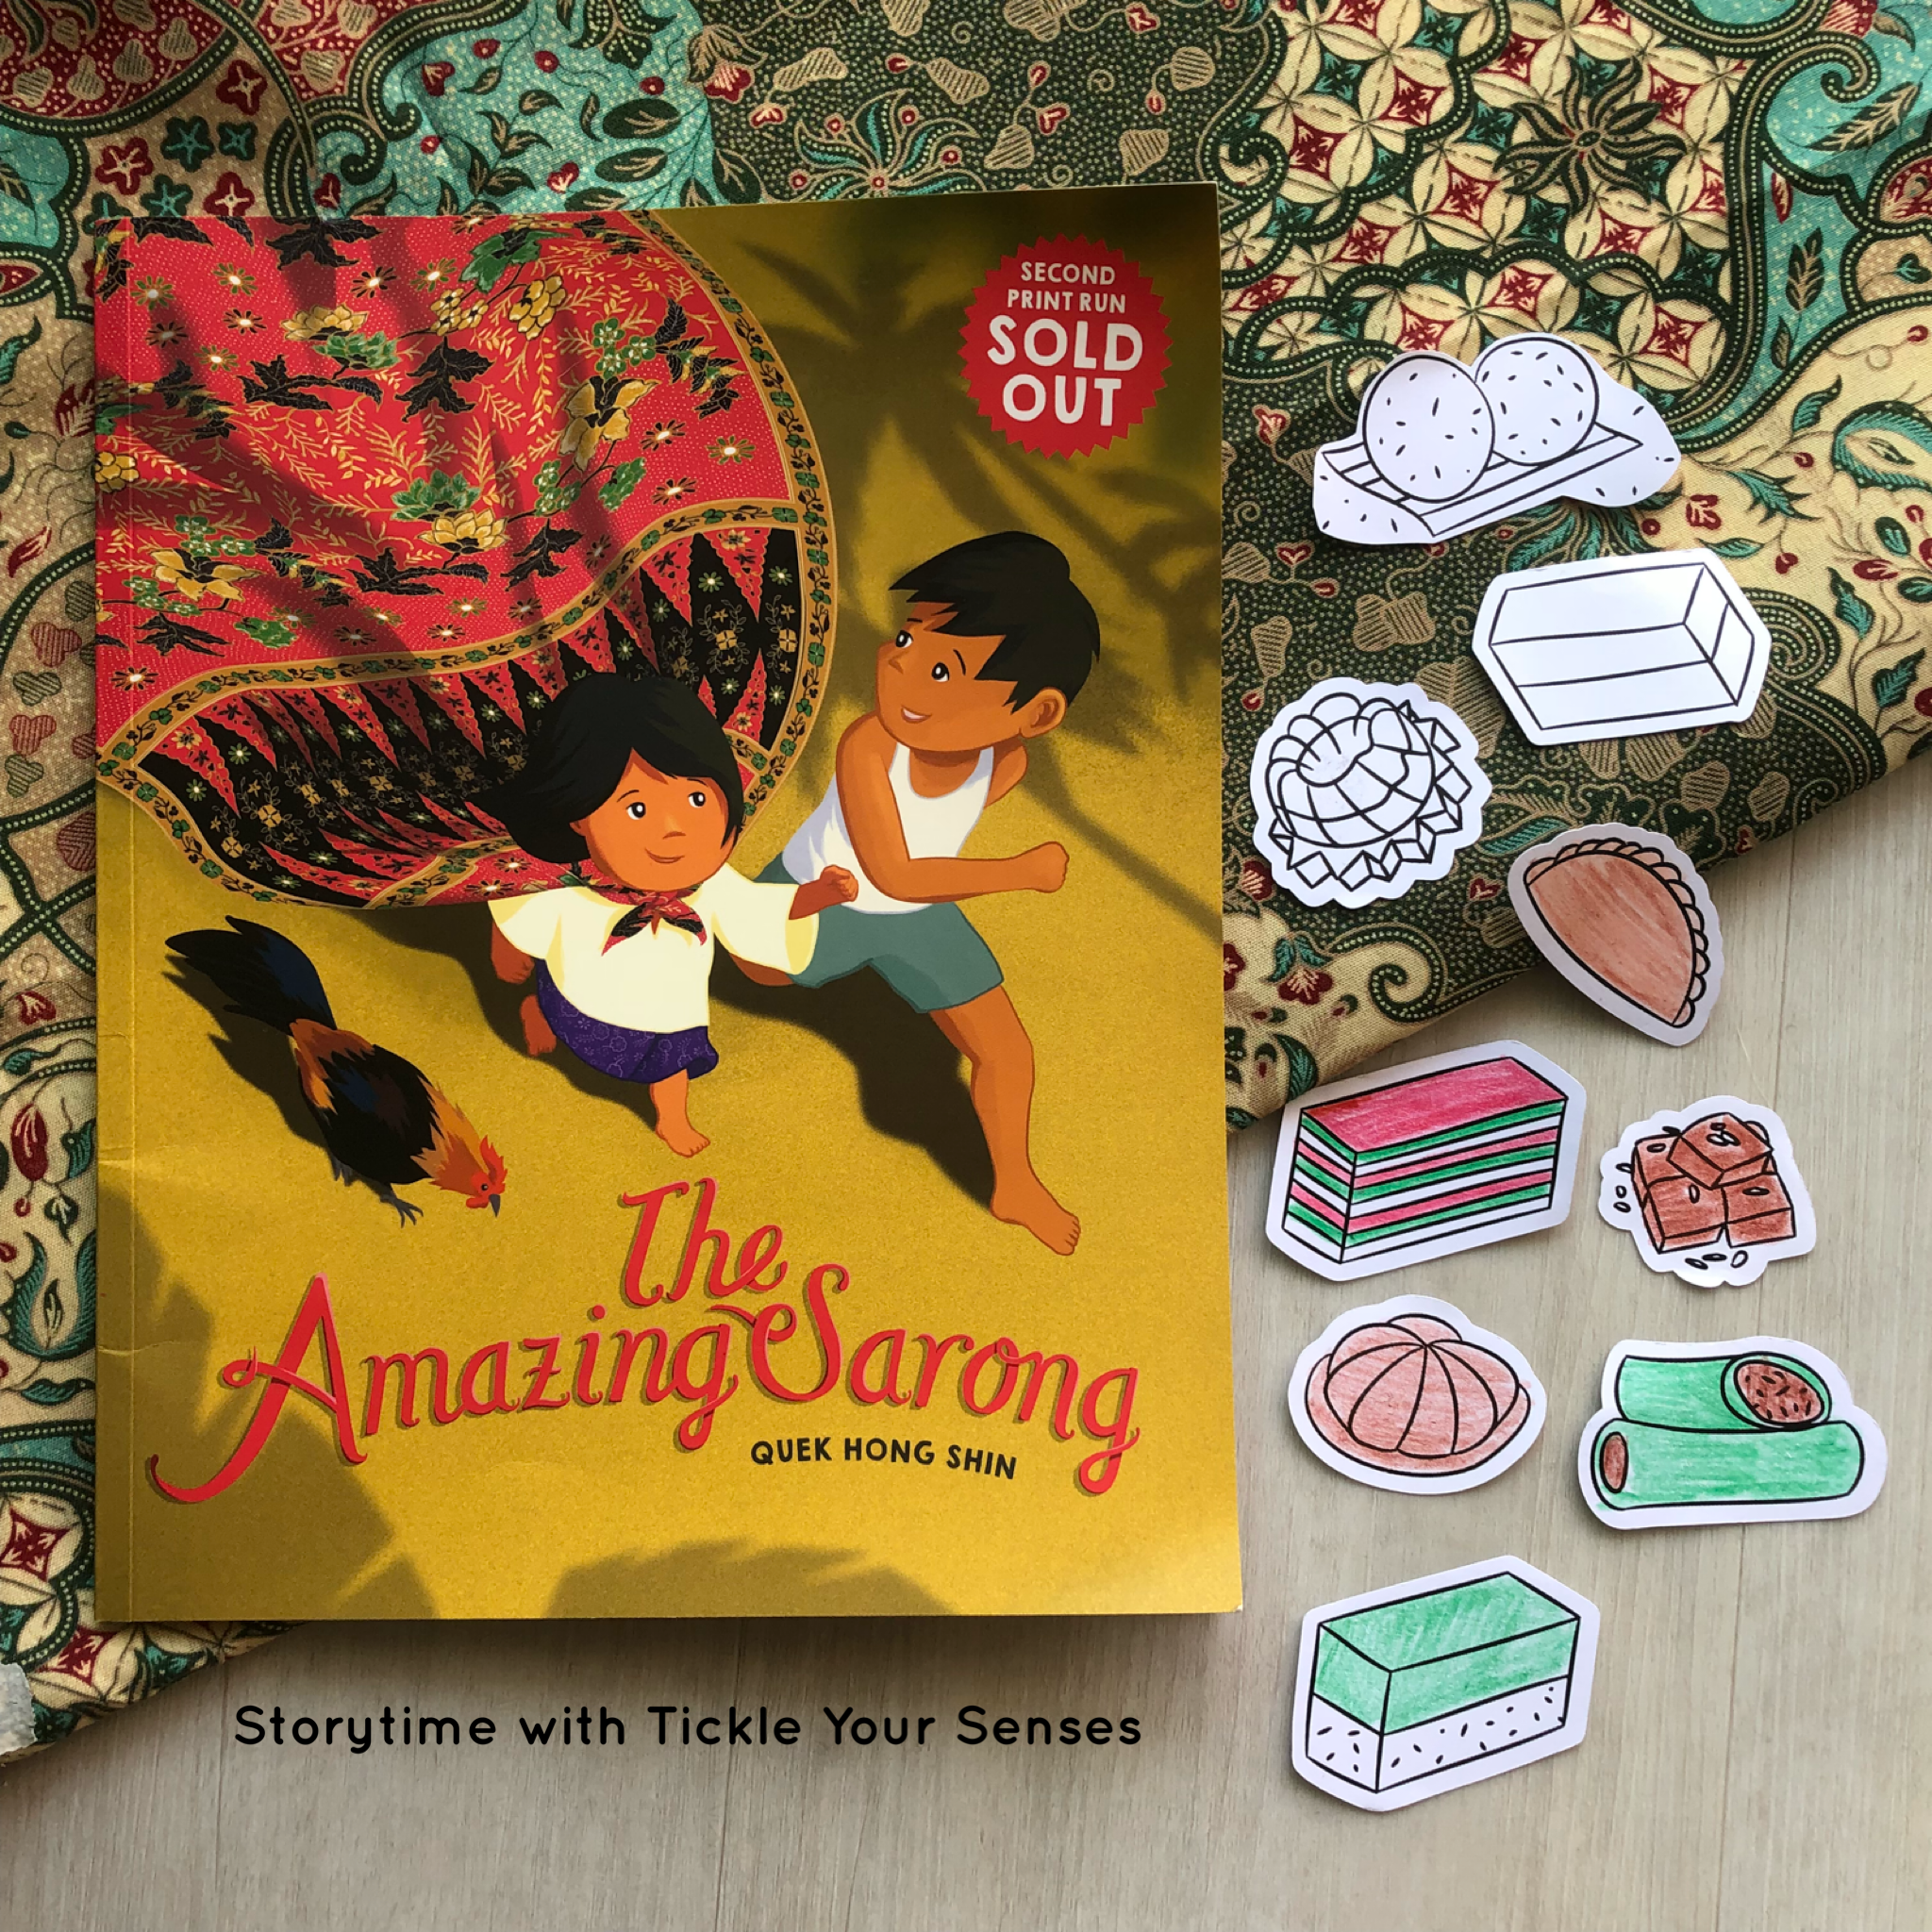 Storytime at Liliewoods Social - 'The Amazing Sarong" by Quek Hong Shin 25 August